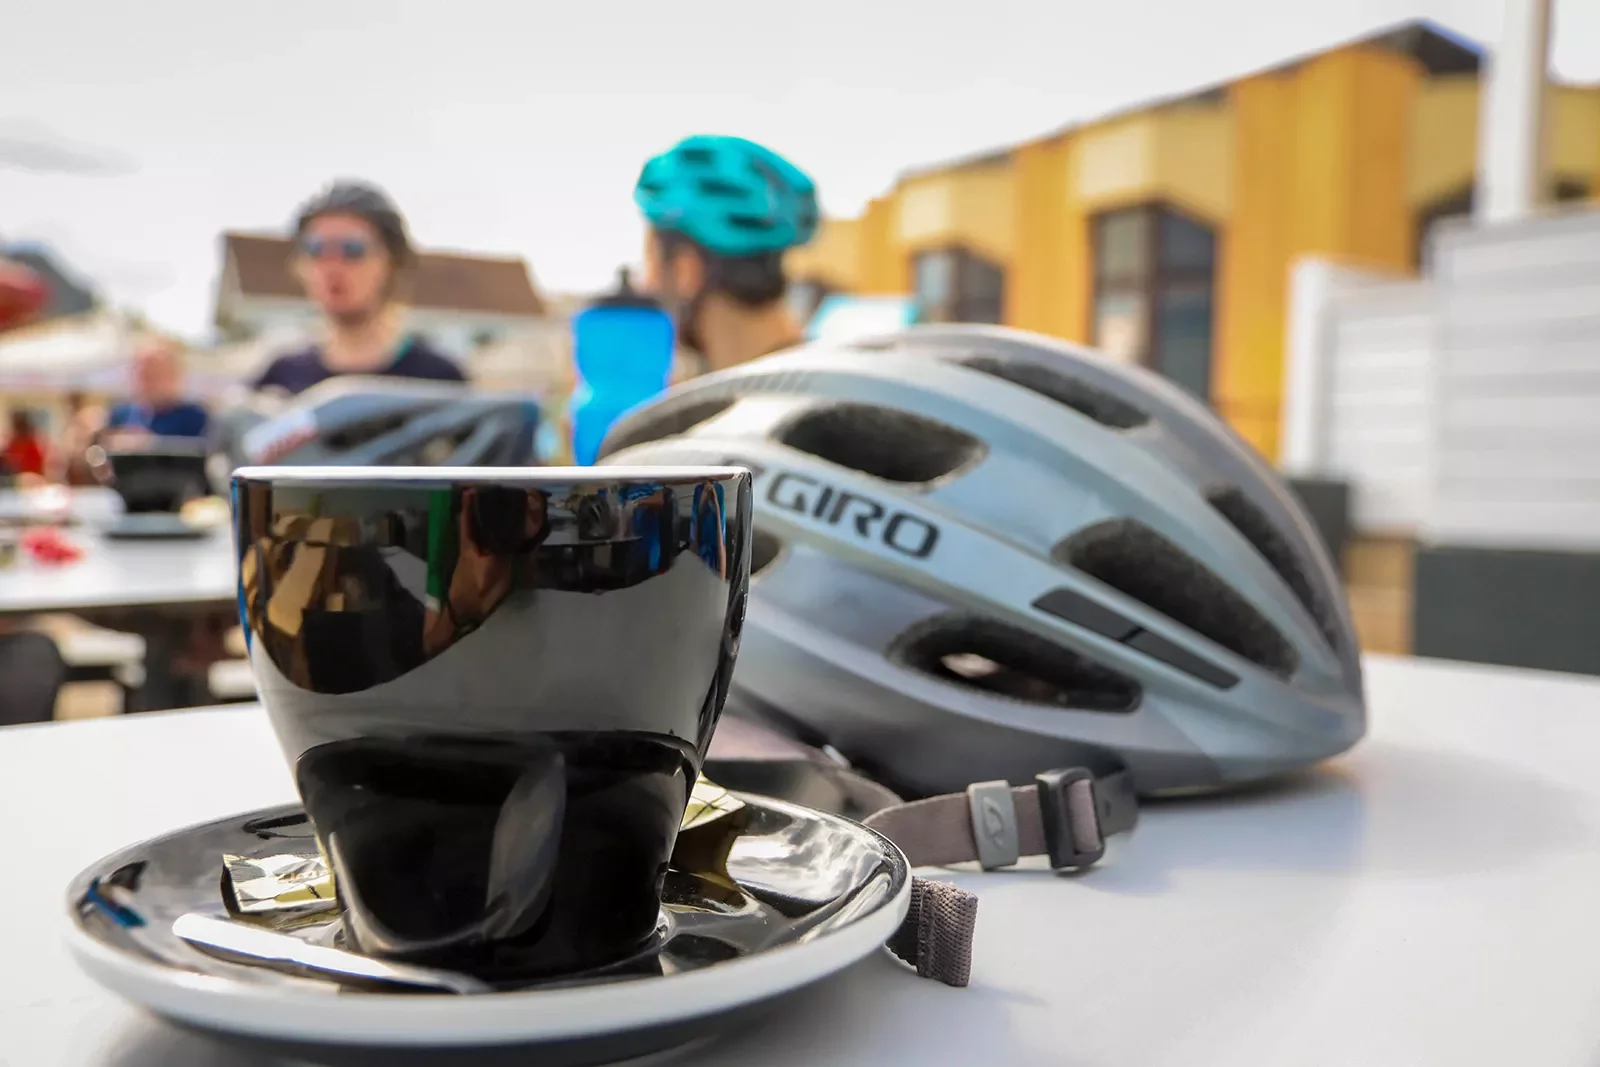 Morning Coffee After Ride